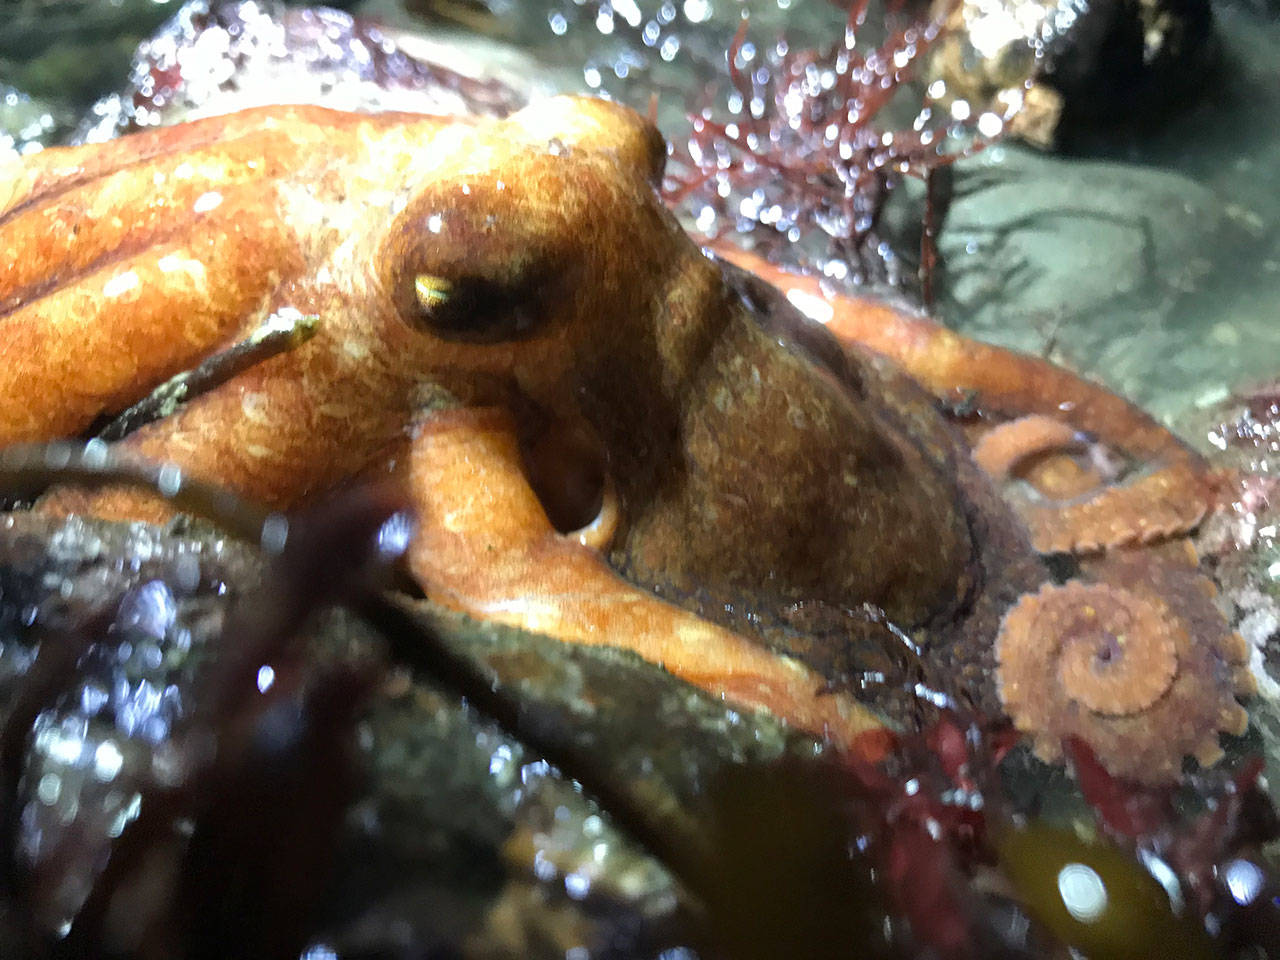 A small specimen of a giant Pacific octopus was one of the many species discovered at the Full Moon Beach Walk conducted last month by the Vashon Nature Center’s Beach Naturalists. More than 150 participants observed sunflower sea stars, bioluminescent sea pens and an assortment of nudibranchs illuminated by the full moon eclipse (Bianca Perla Photo).